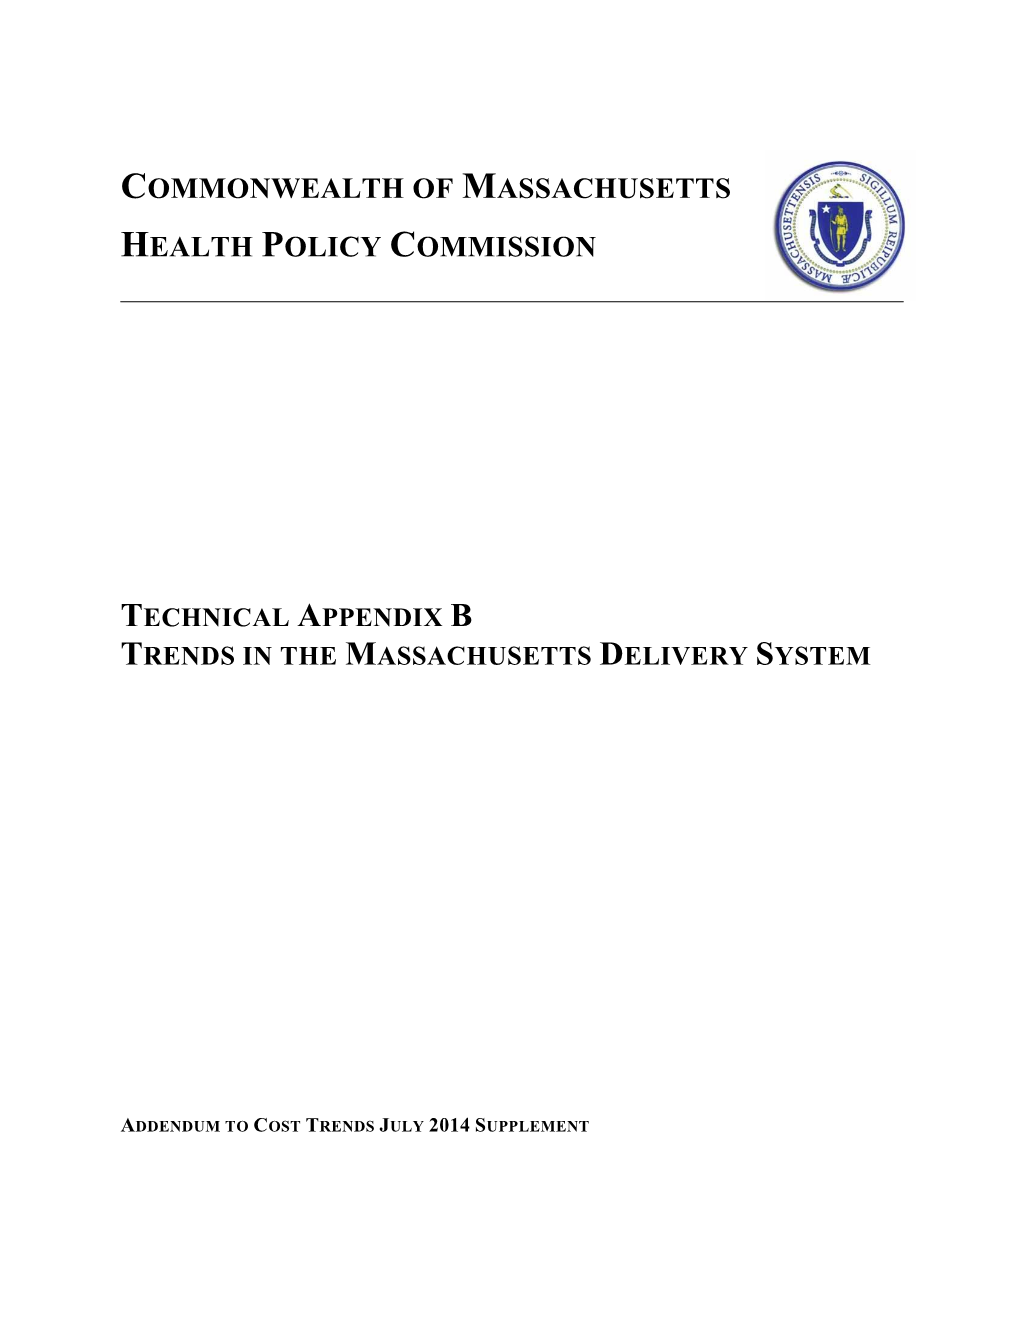 Commonwealth of Massachusetts Health Policy Commission